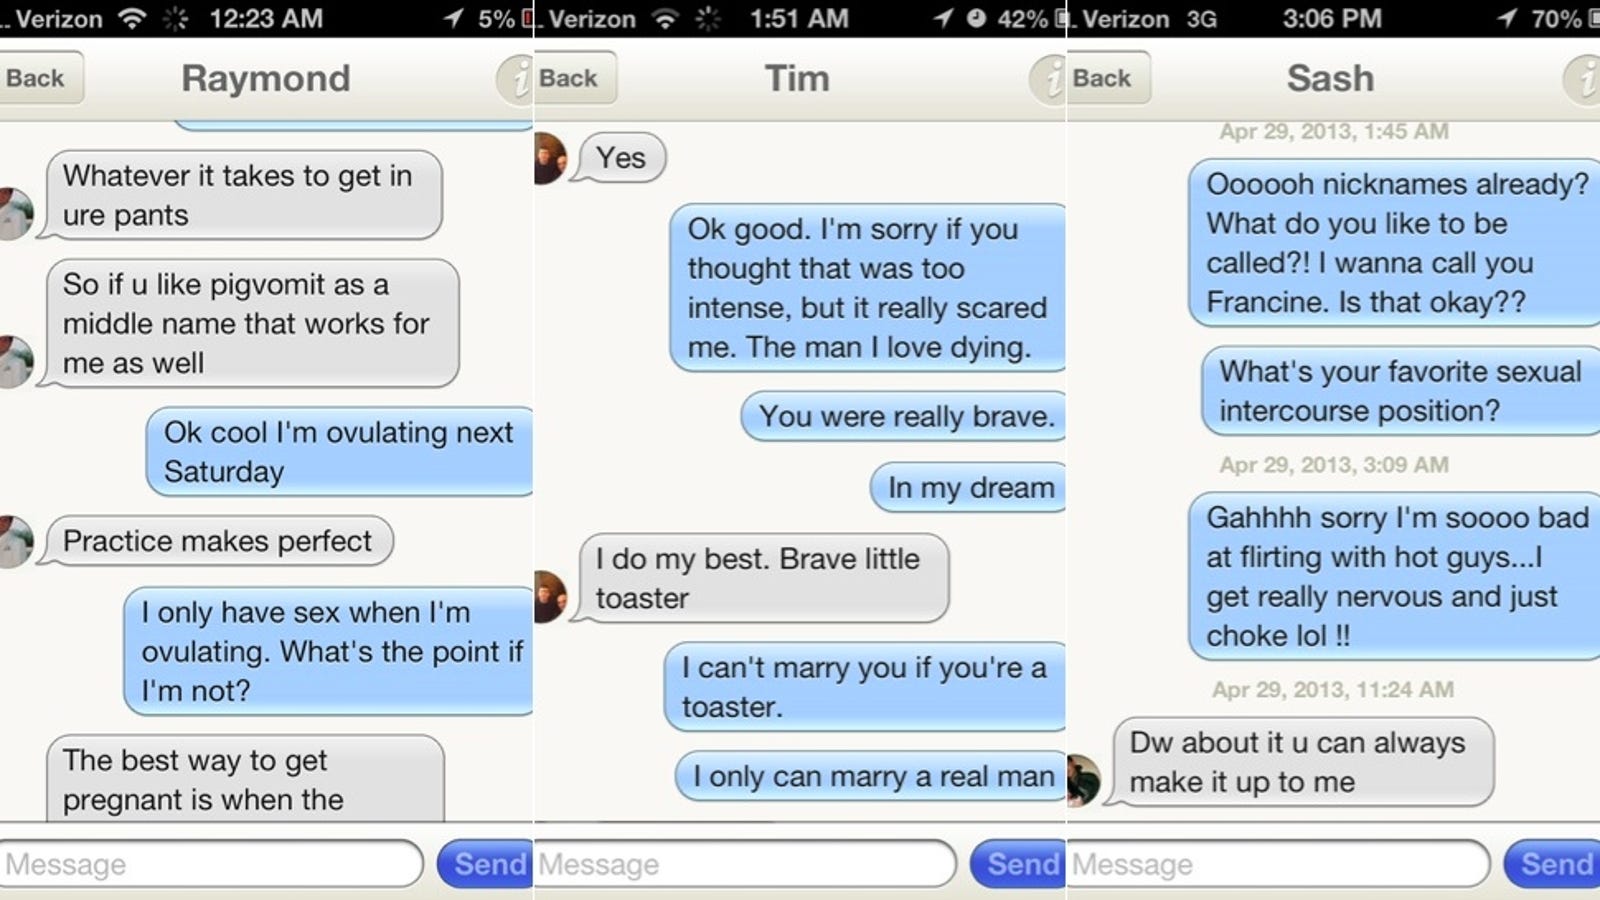 Mobile Dating App Brings Out The Crazy In Dudes